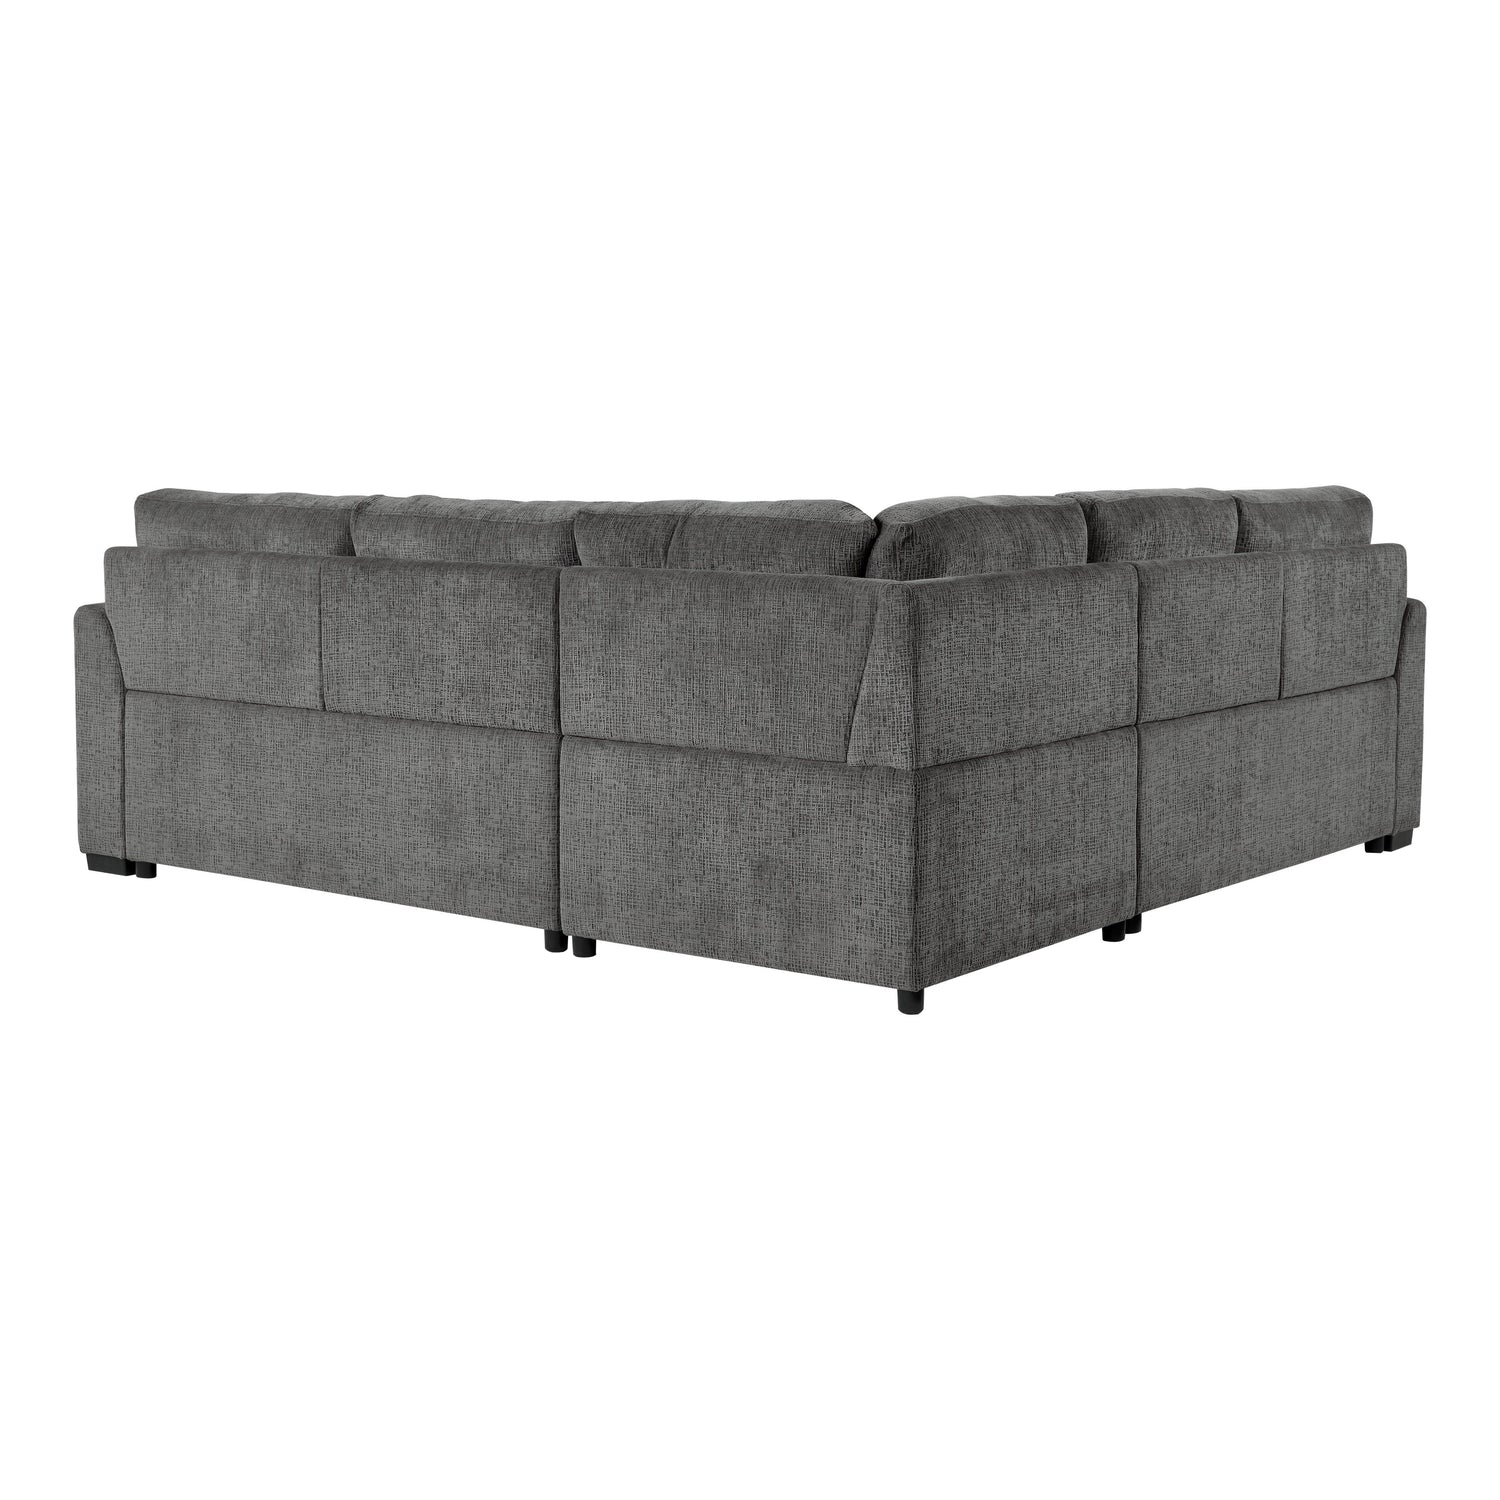 Lanning Gray Sleeper Sectional - 9311GY*SC - Bien Home Furniture &amp; Electronics